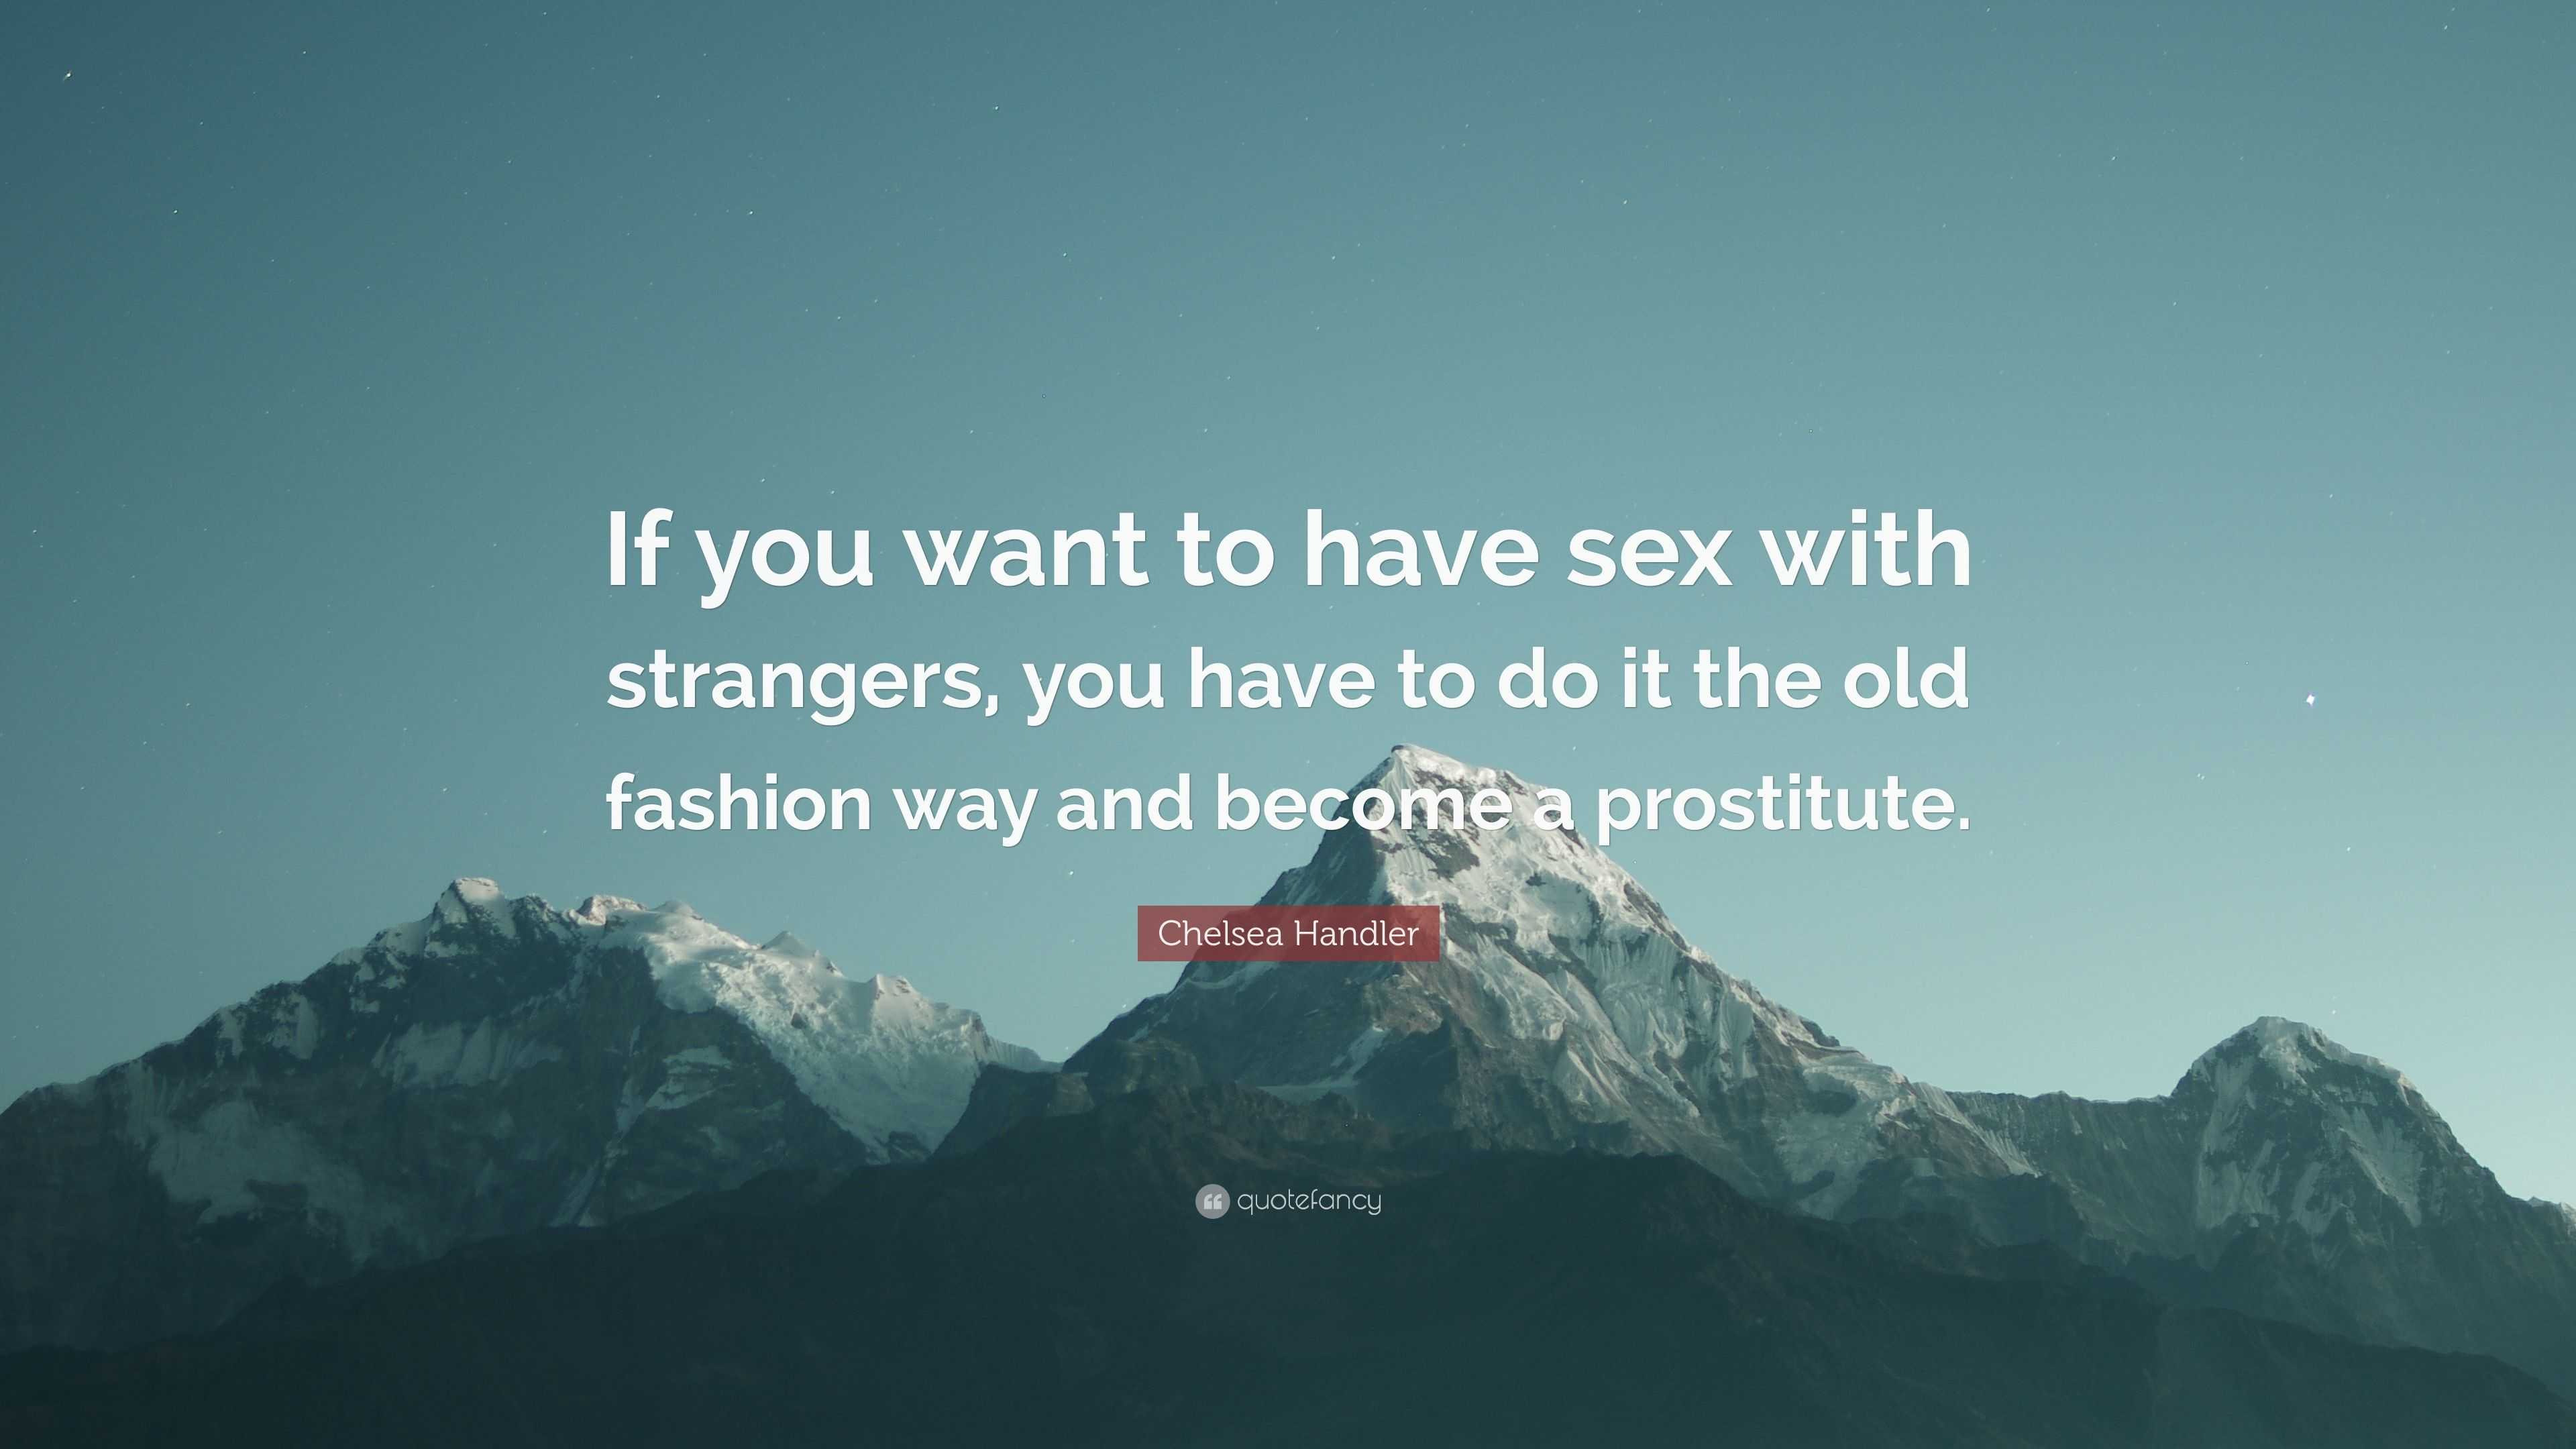 Chelsea Handler Quote “If you want to have sex with strangers, you have to do it picture